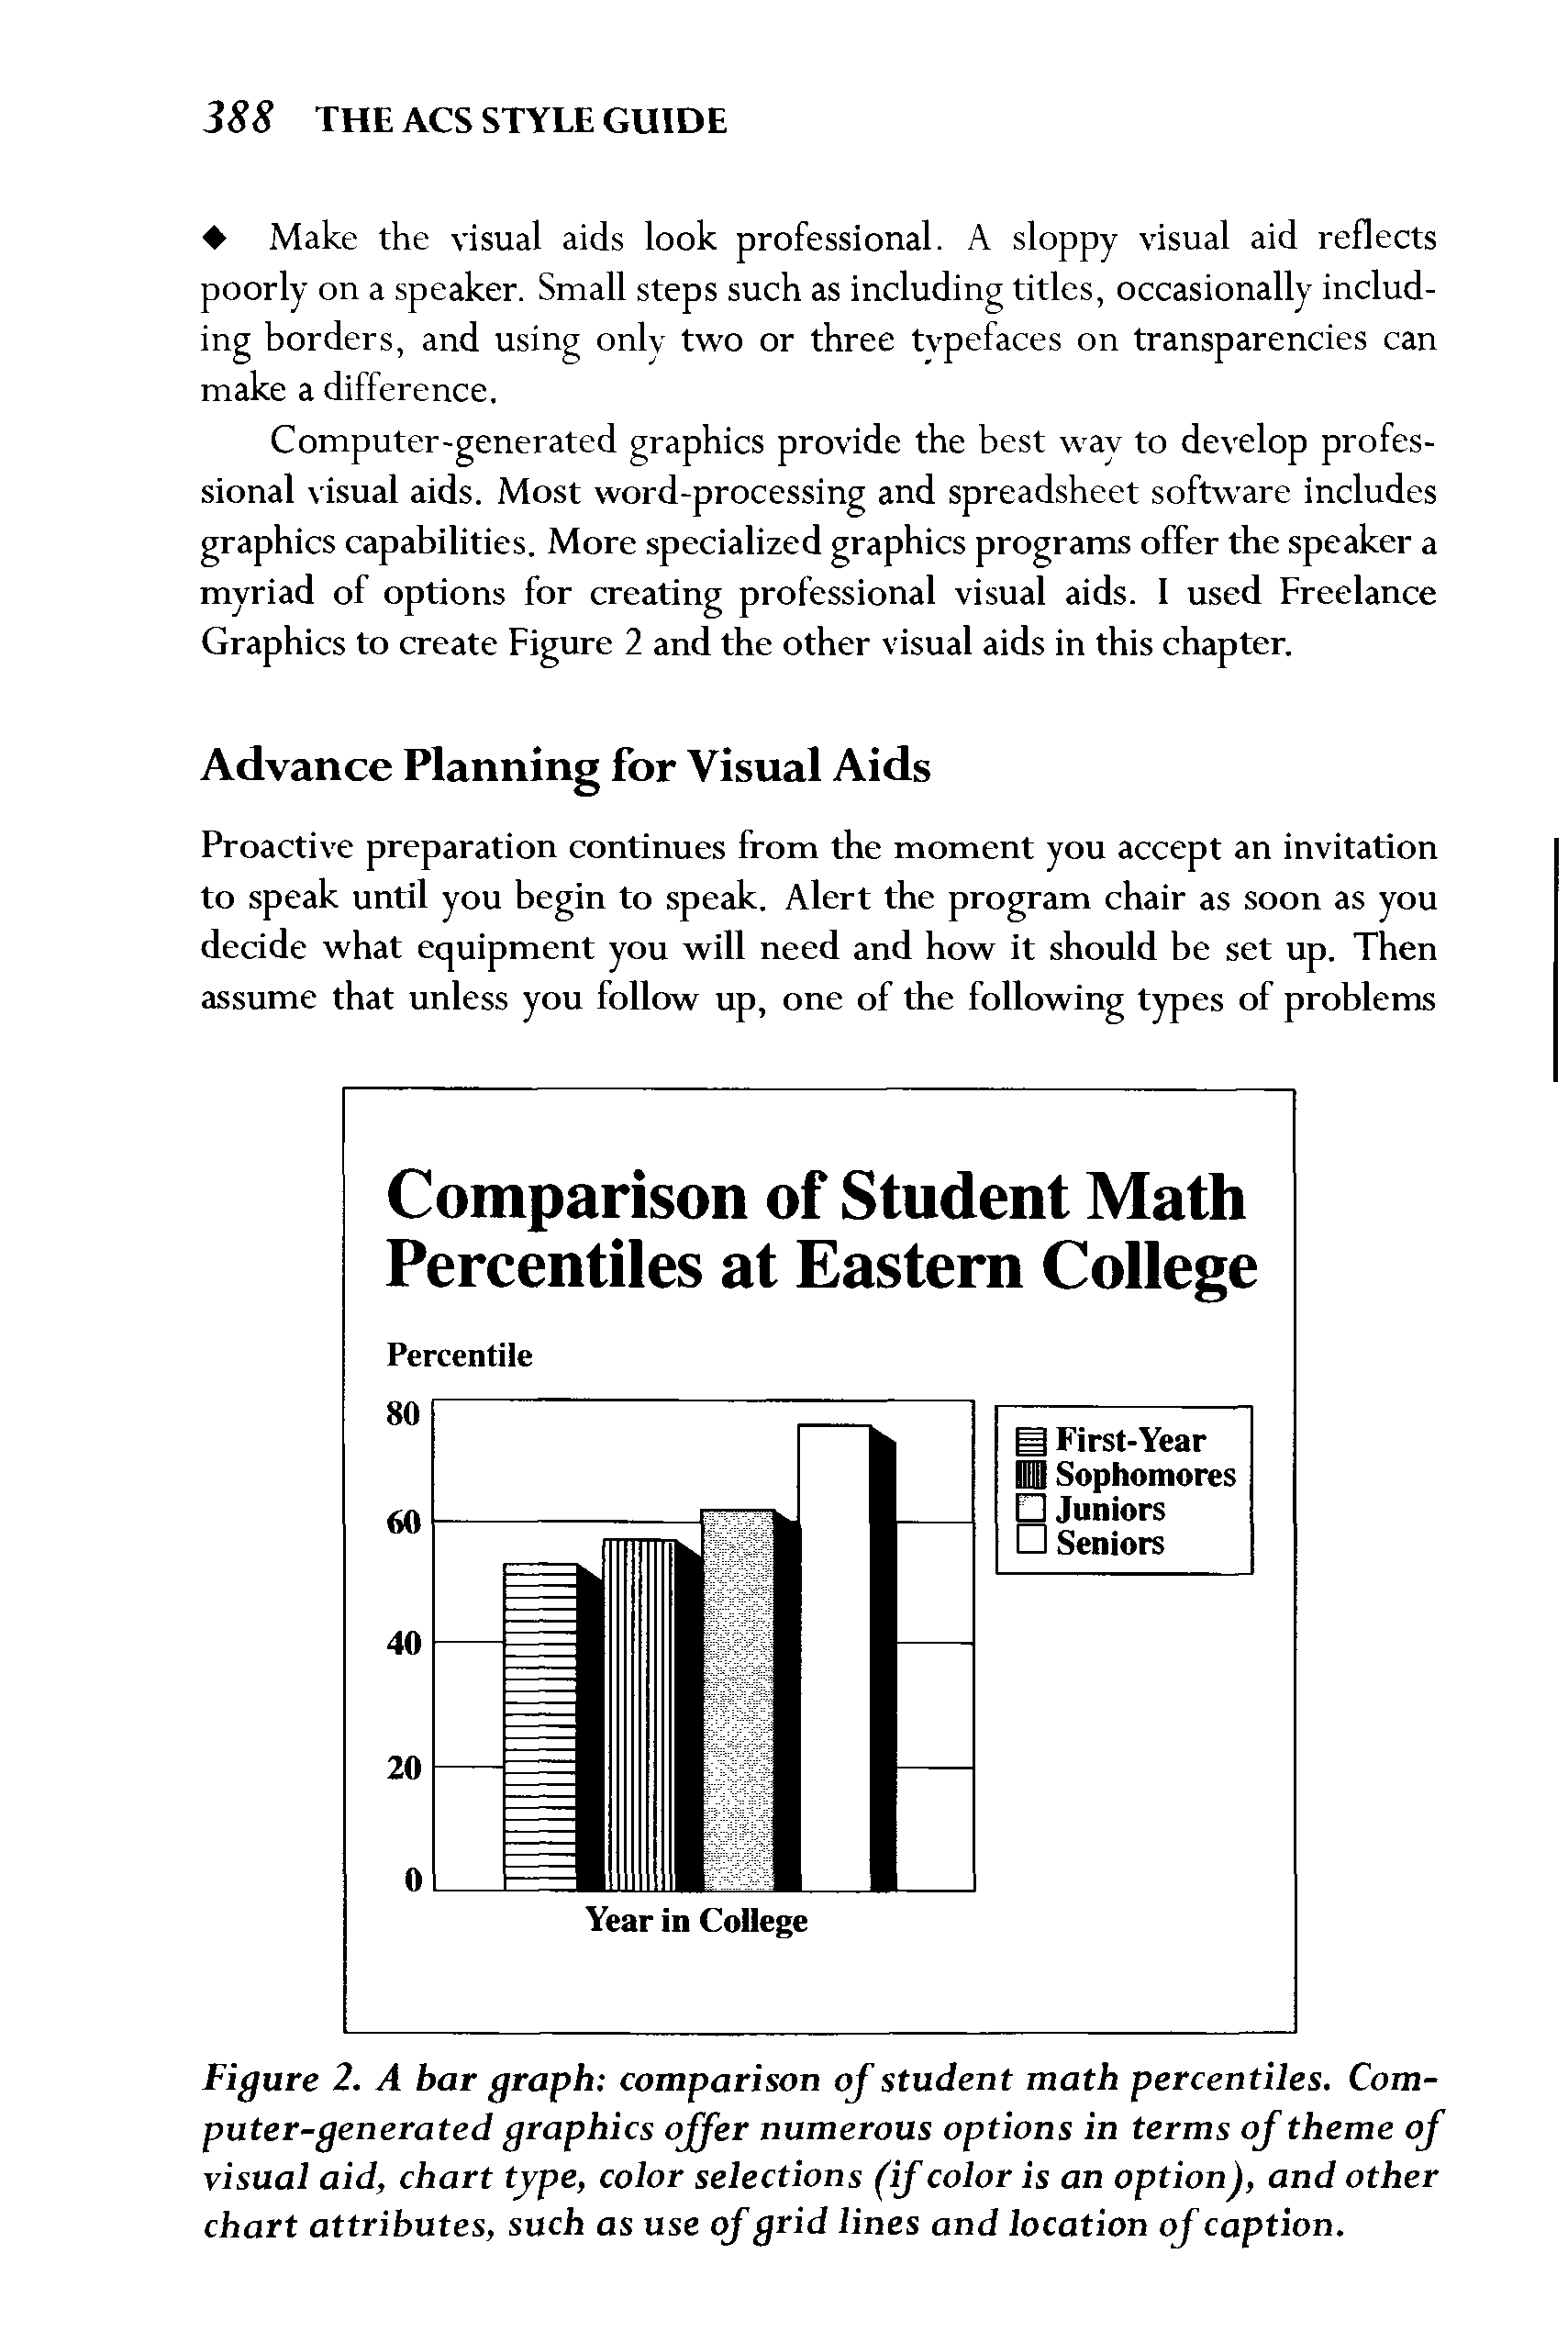 Figure 2. A bar graph comparison of student math percentiles. Computer-generated graphics offer numerous options in terms of theme of visual aid, chart type, color selections (if color is an option), and other chart attributes, such as use of grid lines and location of caption.